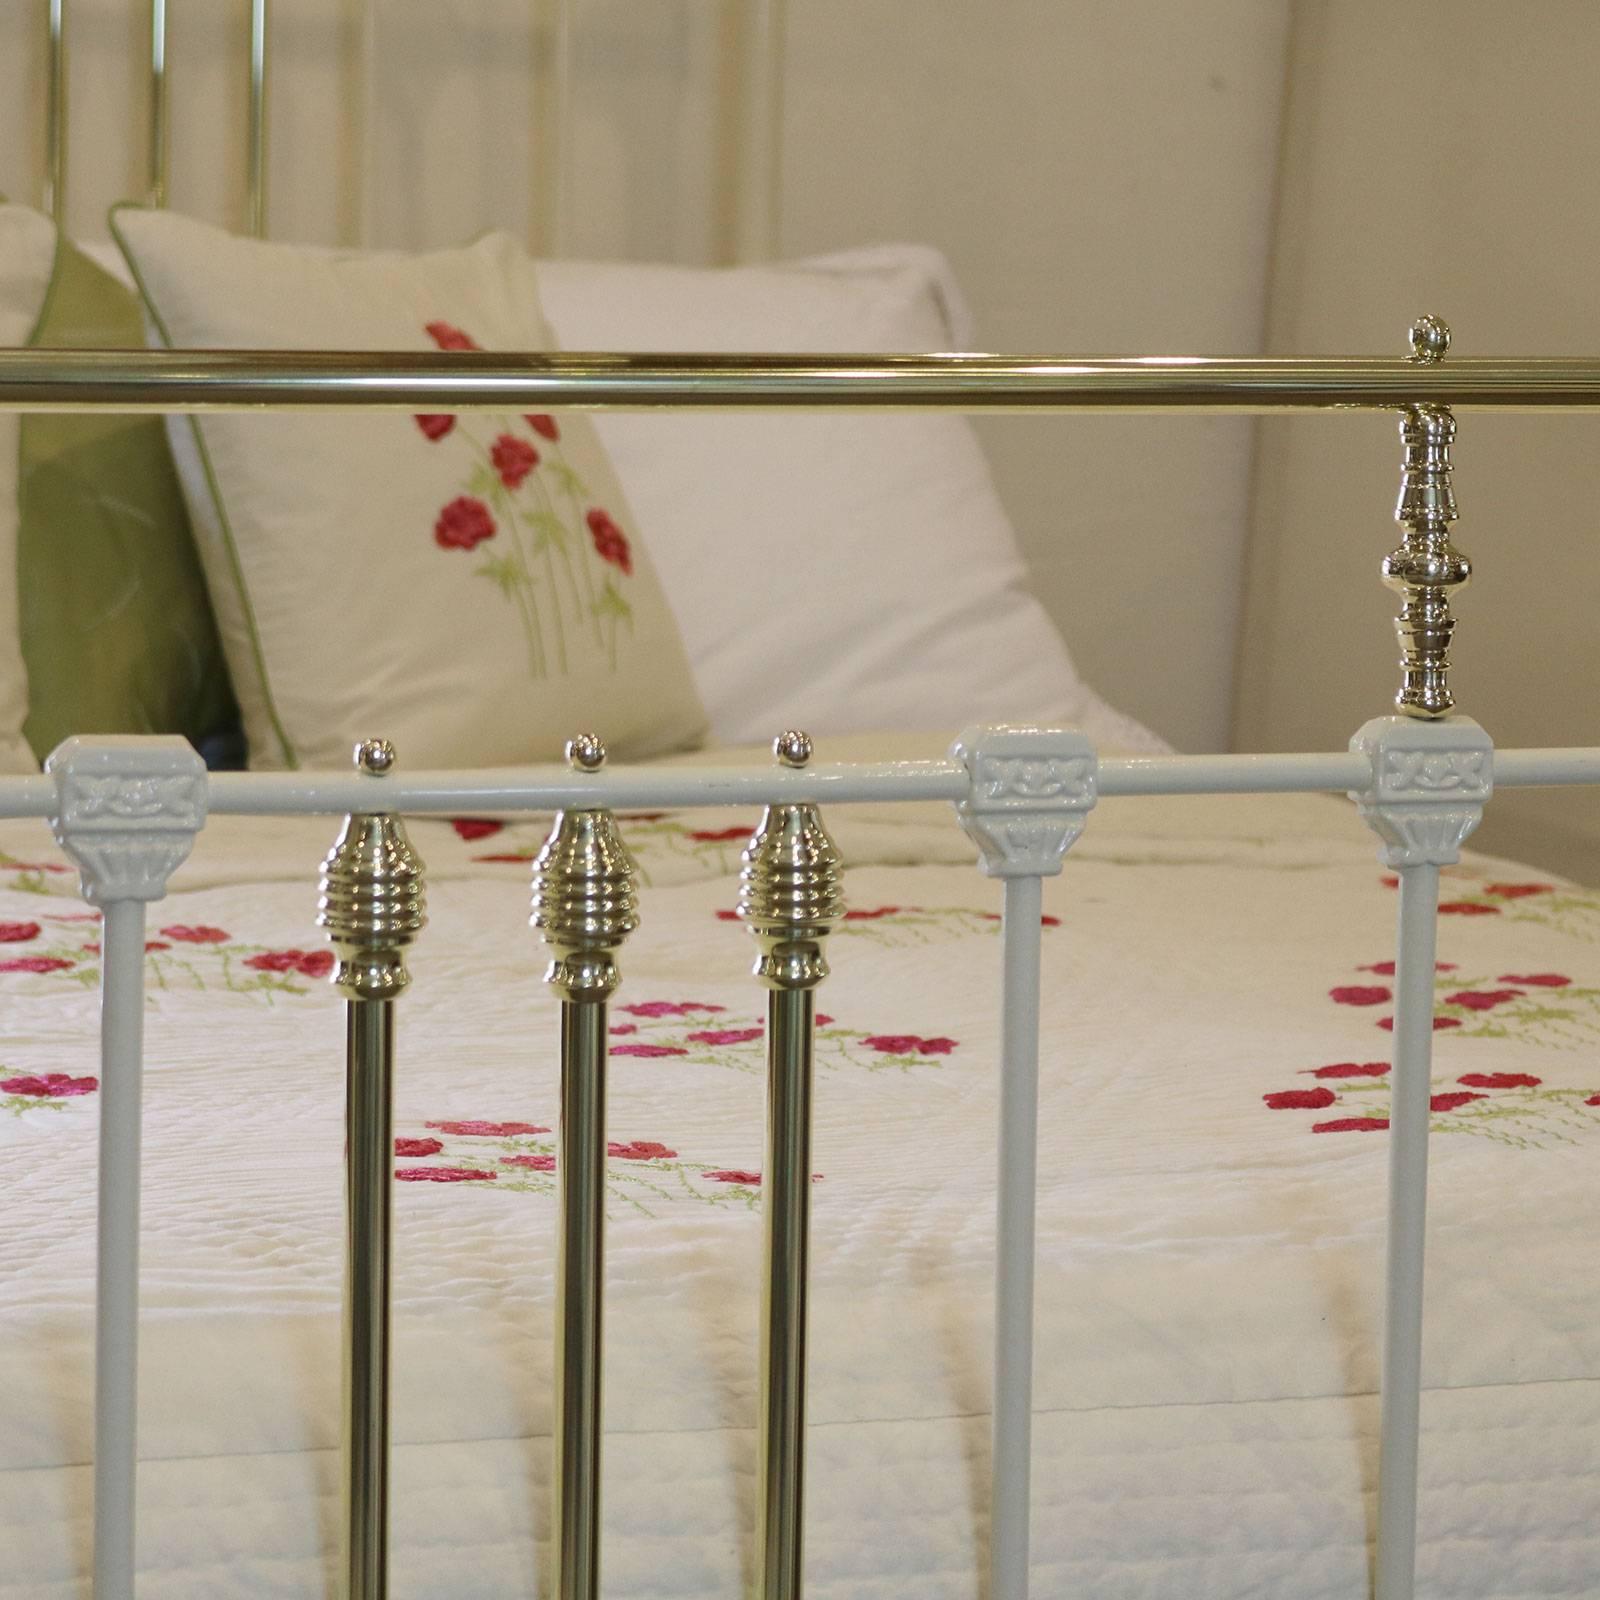 Wide Brass and Iron Bed in Cream, MK81 1